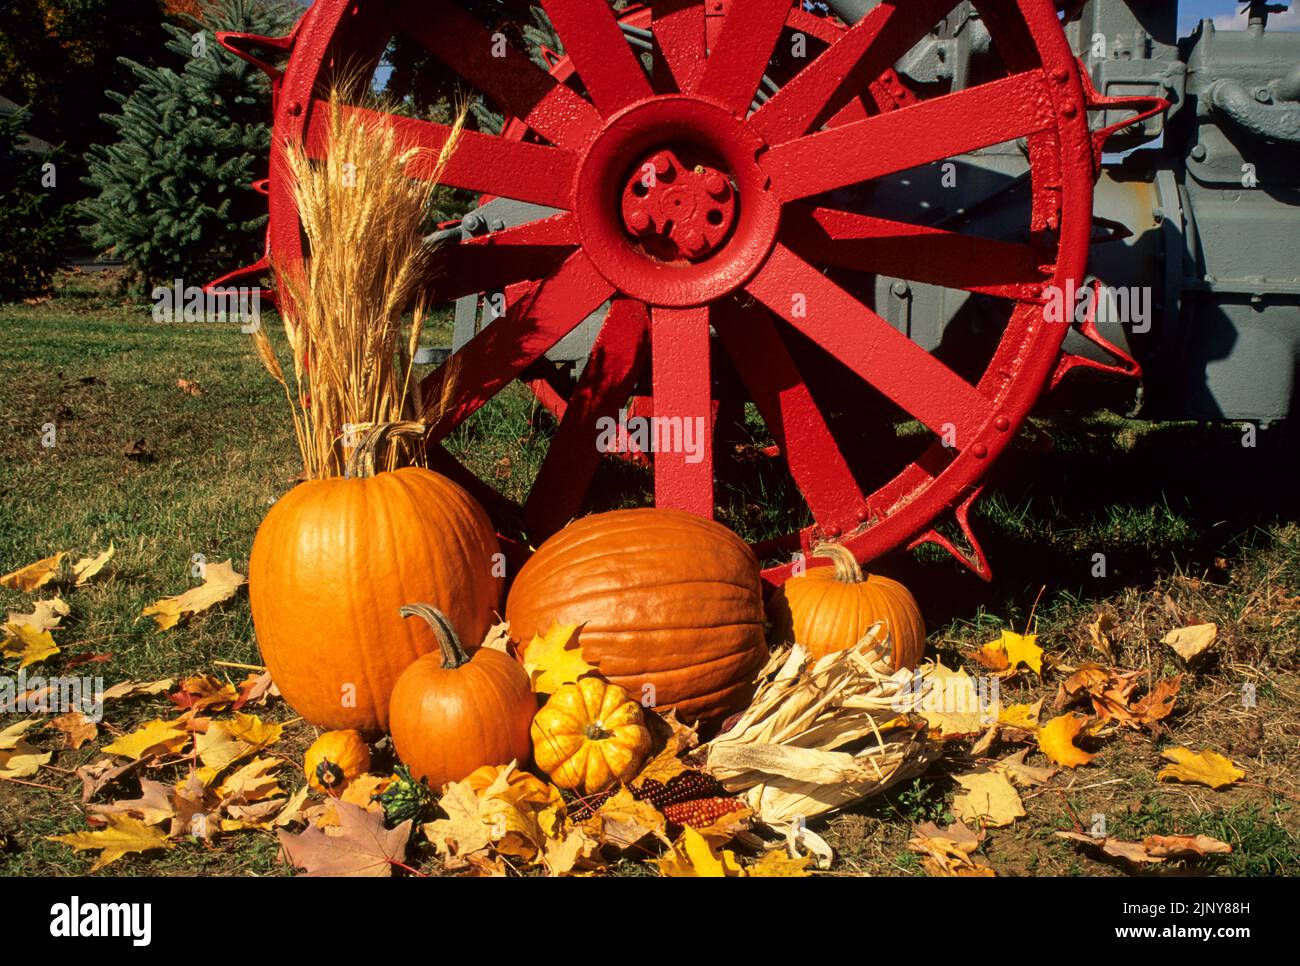 Autumn garden vintage old antique Fordson tractor wheel with pumpkins and gourds fall leaves farm, Millstone, New Jersey, USA US NJ 2004 scanned slide Stock Photo